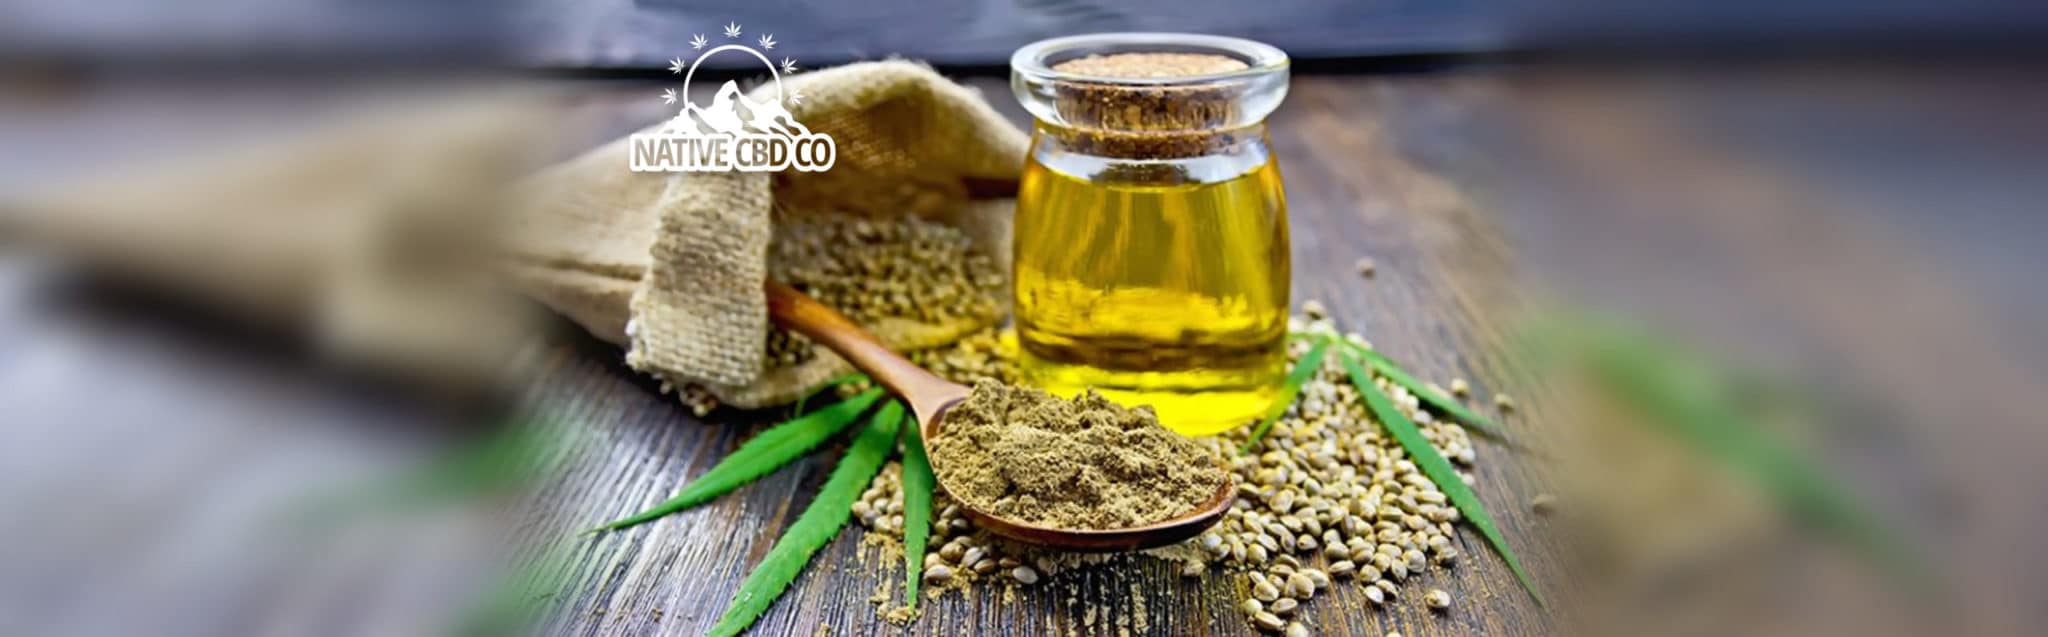 Pure CBD Products for Health and Wellness - NATIVE CBD CO